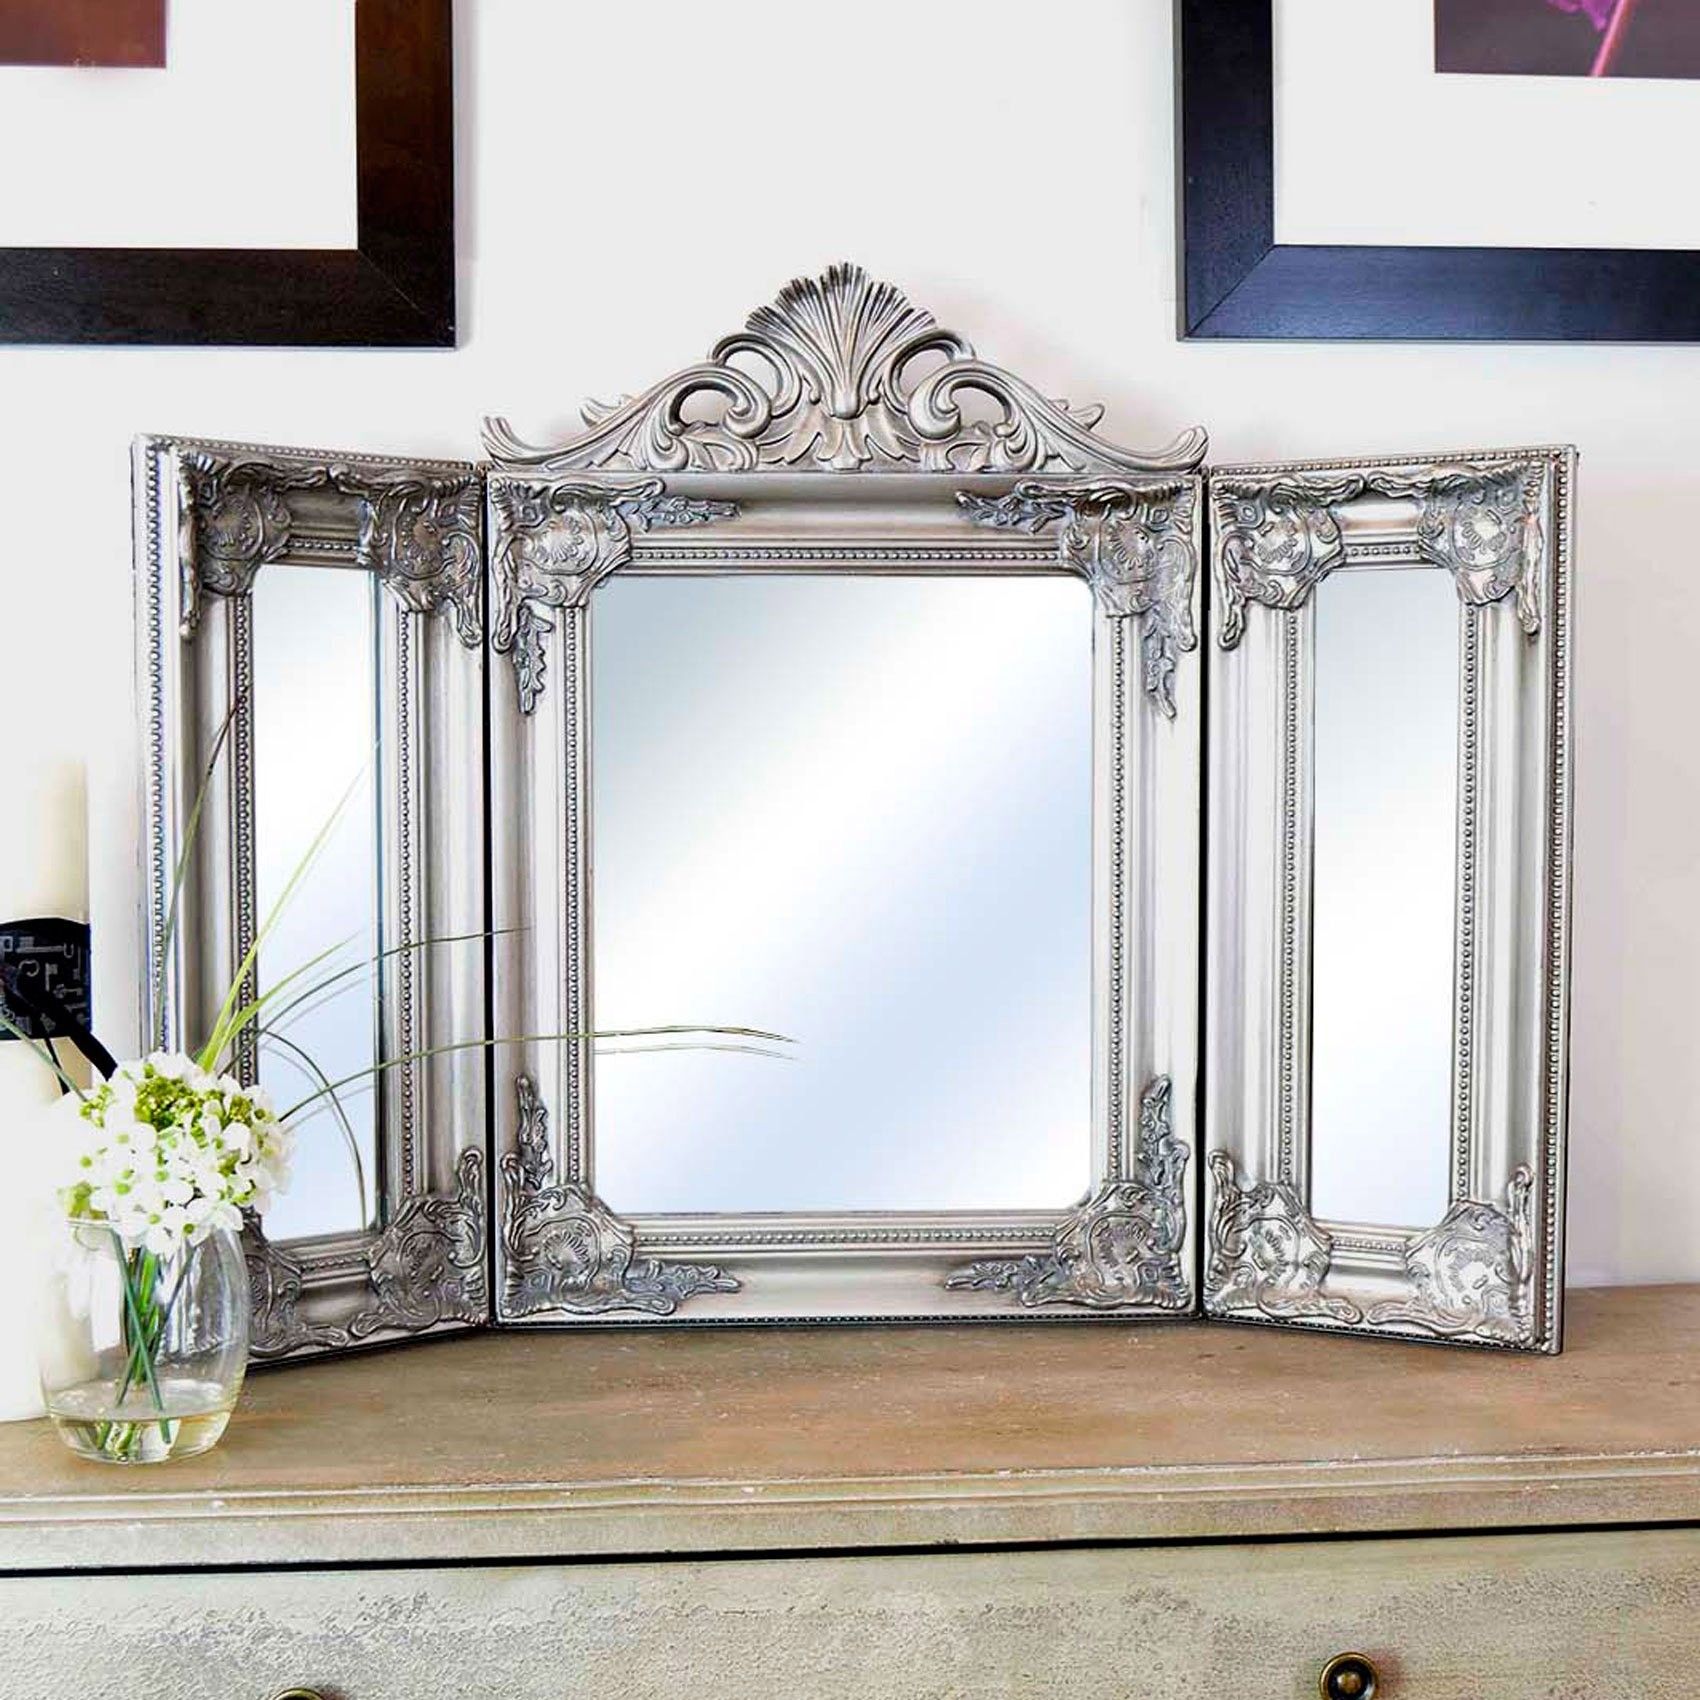 Elegant Silver Antique Free Standing Dressing Table Mirror For Mirror On Stand For Dressing Table (View 5 of 15)